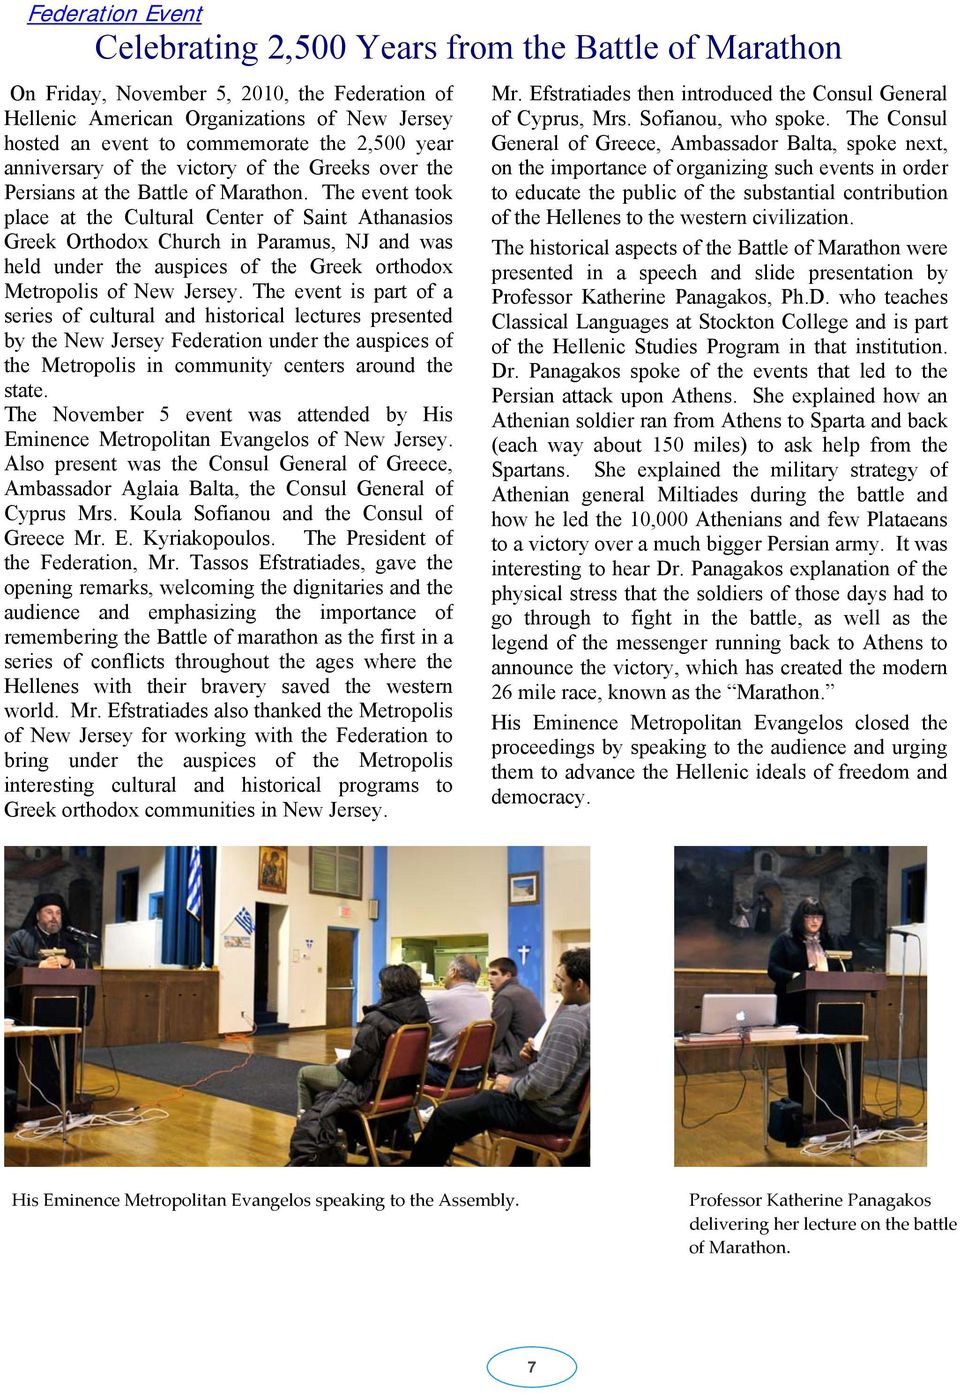 The event took place at the Cultural Center of Saint Athanasios Greek Orthodox Church in Paramus, NJ and was held under the auspices of the Greek orthodox Metropolis of New Jersey.